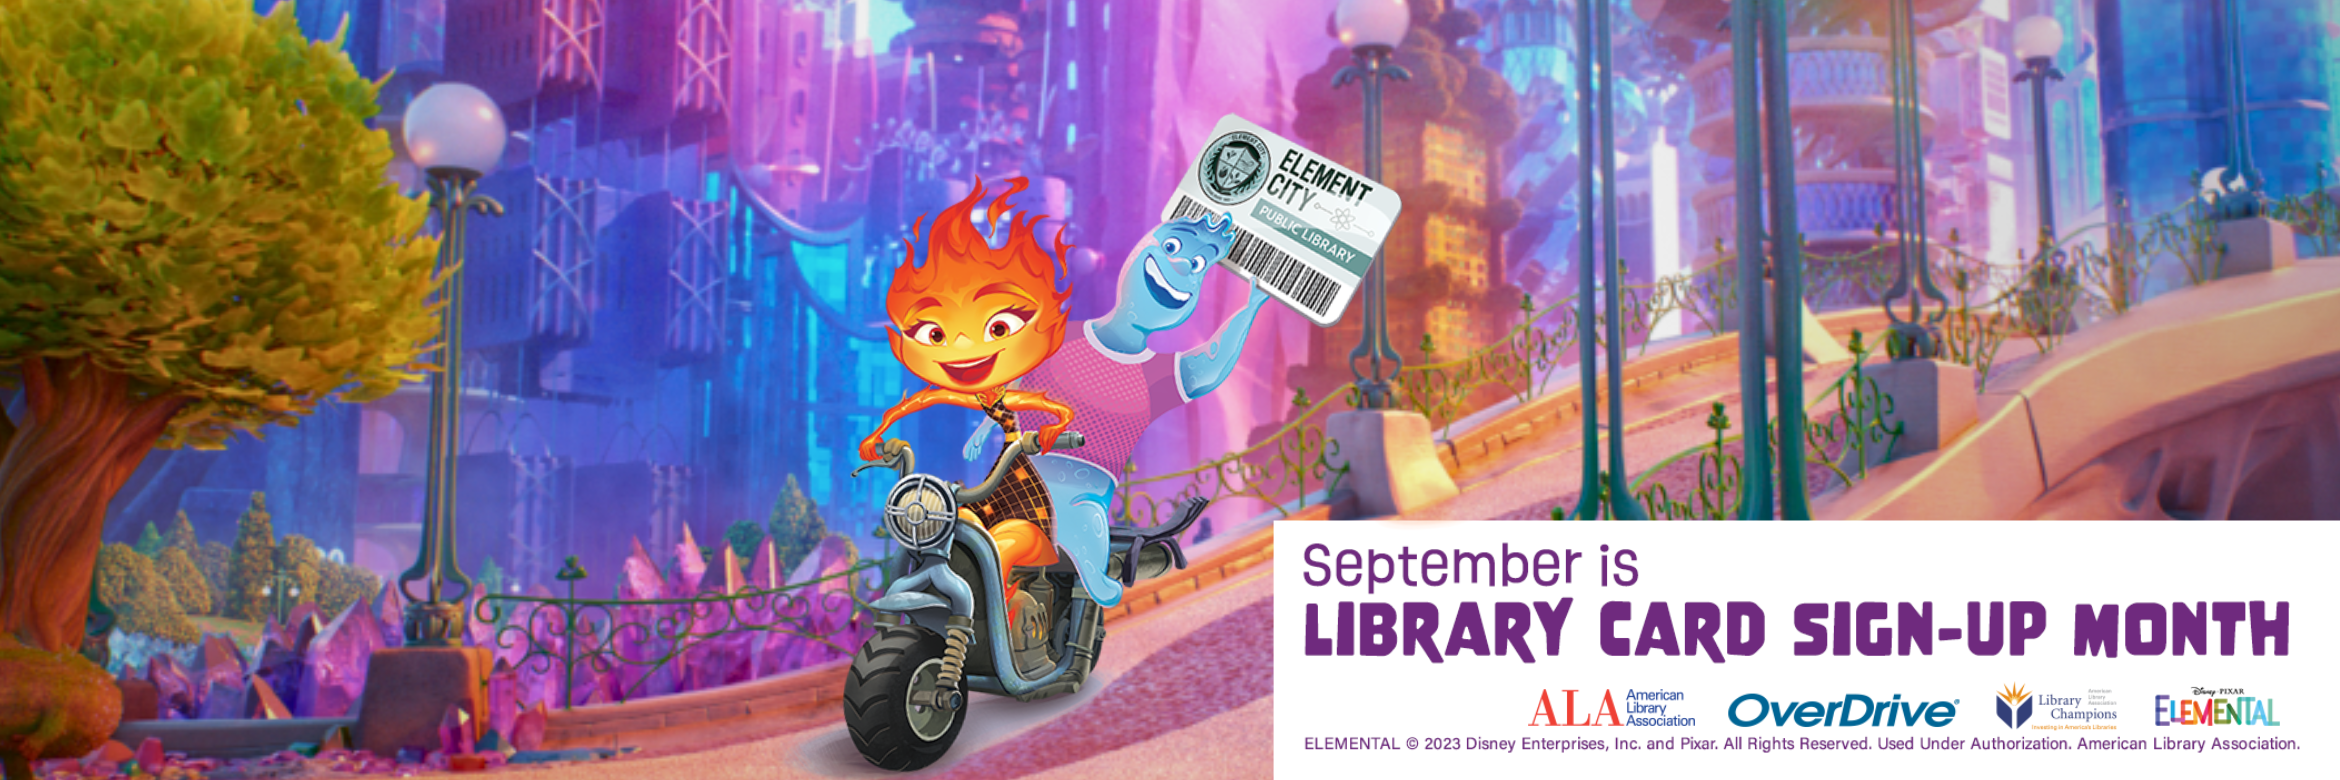 Image of banner for library card sign up month